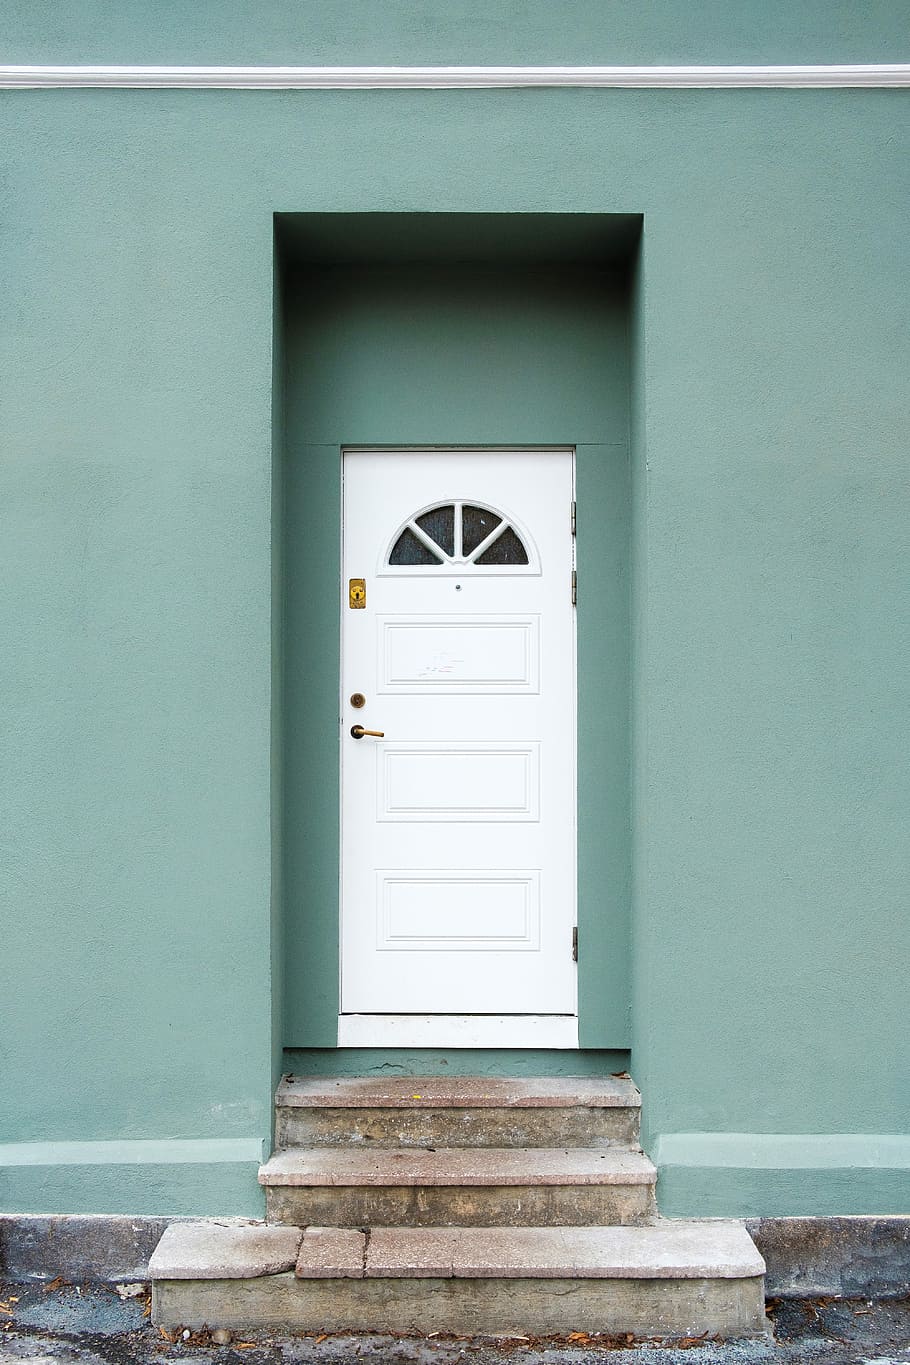 green and white concrete house during daytime photo, white wooden door